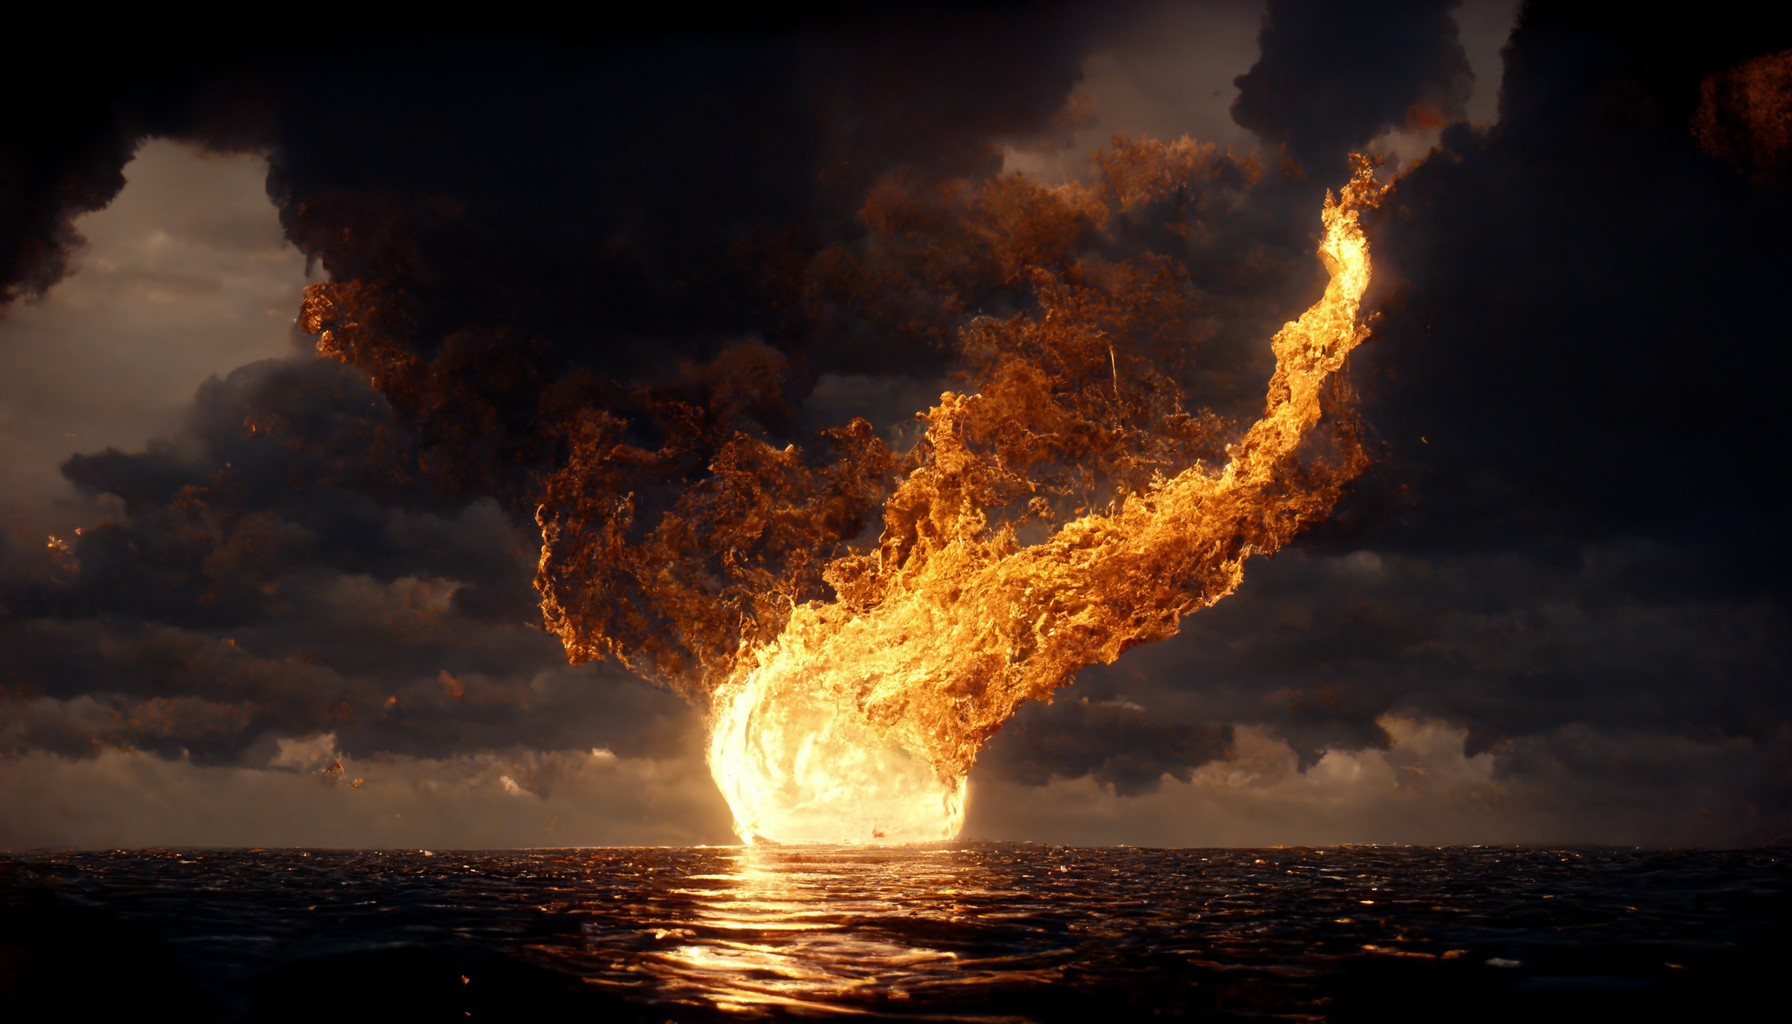 mattlee_A_mysterious_flame_seen_over_the_seas_cinematic_realist_617917e0-3988-4283-be8b-c0b2802a8d0c